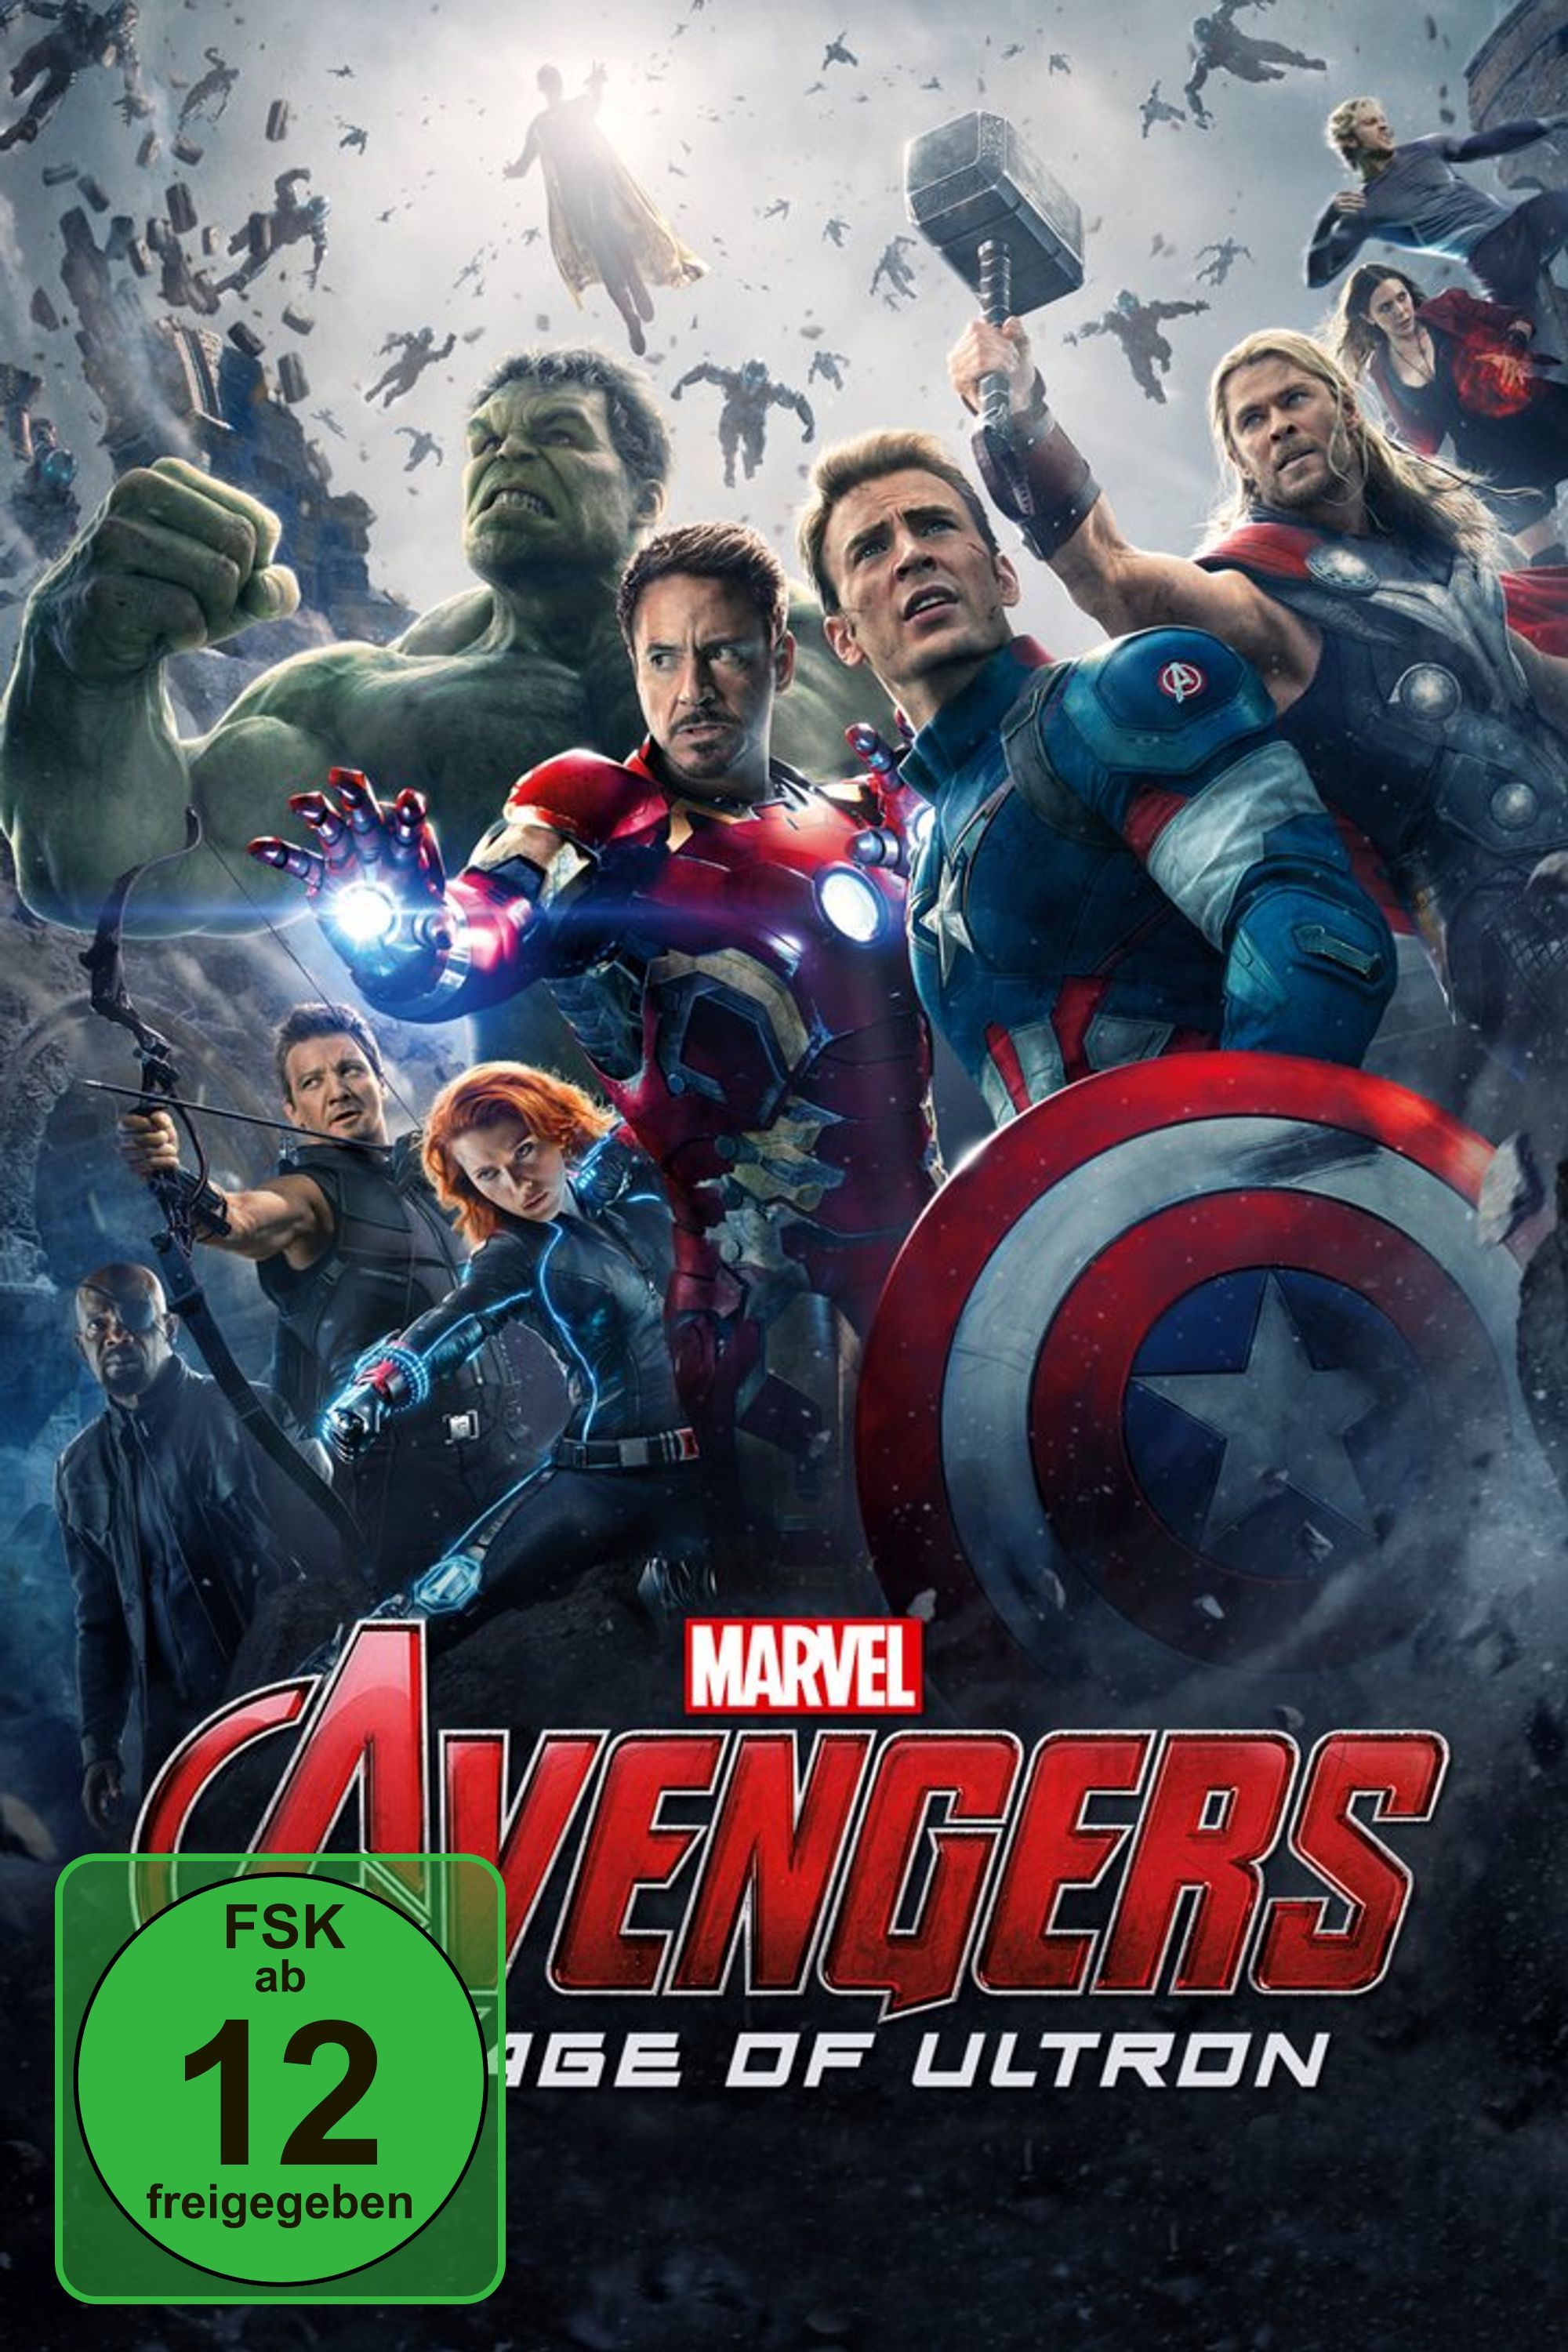 Image of Avengers 2 - Age of Ultron